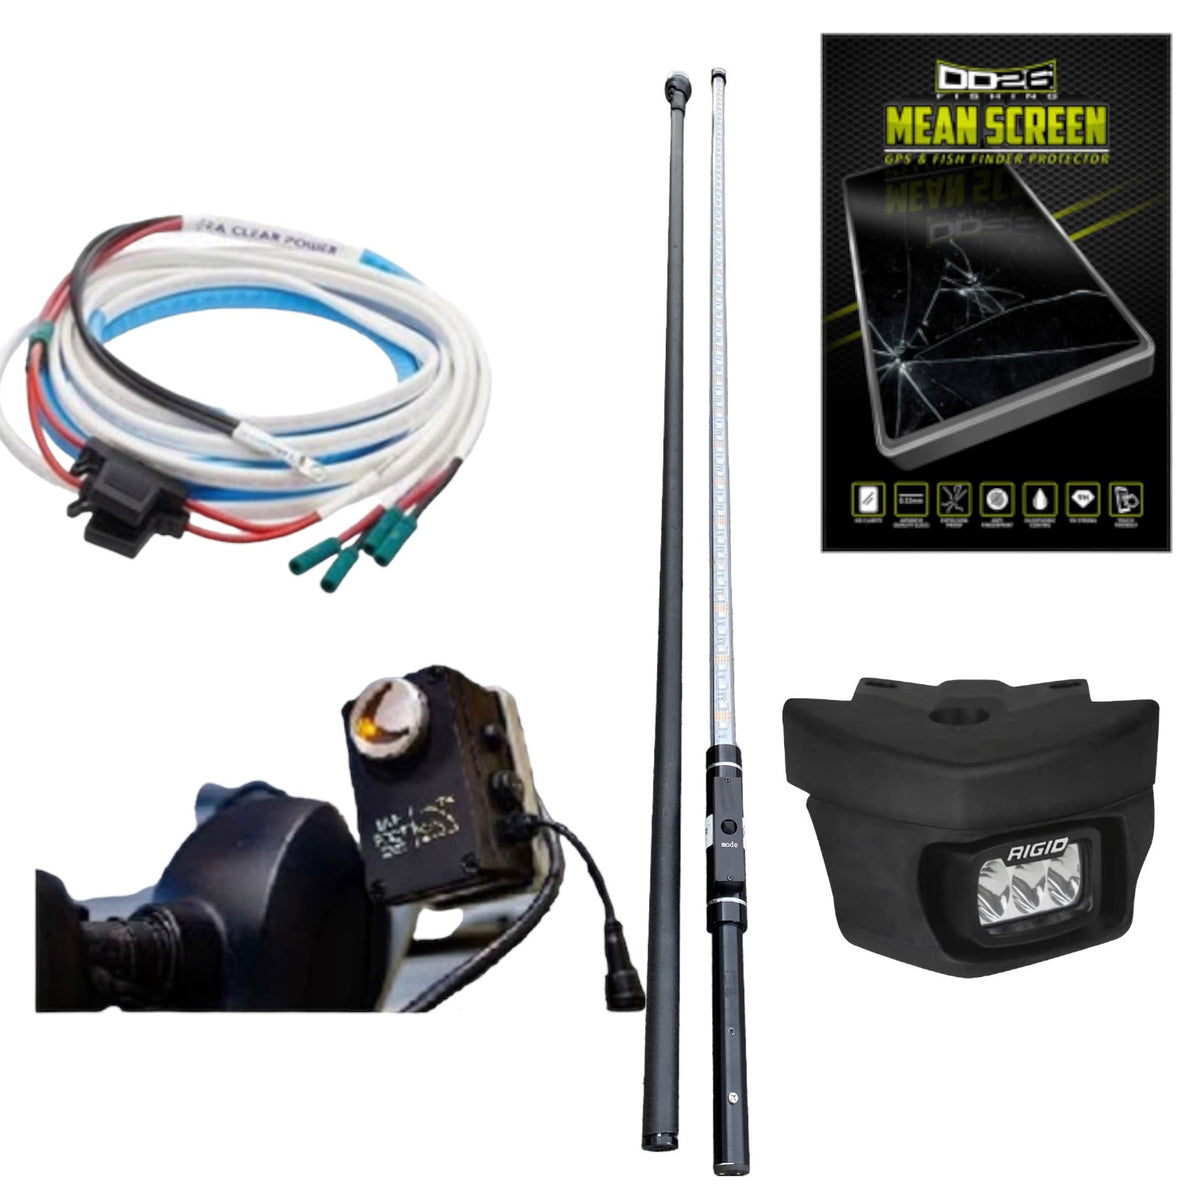 Electronic Accessories, Lights and Live Foot – Tagged Cable Management –  DD26 Fishing